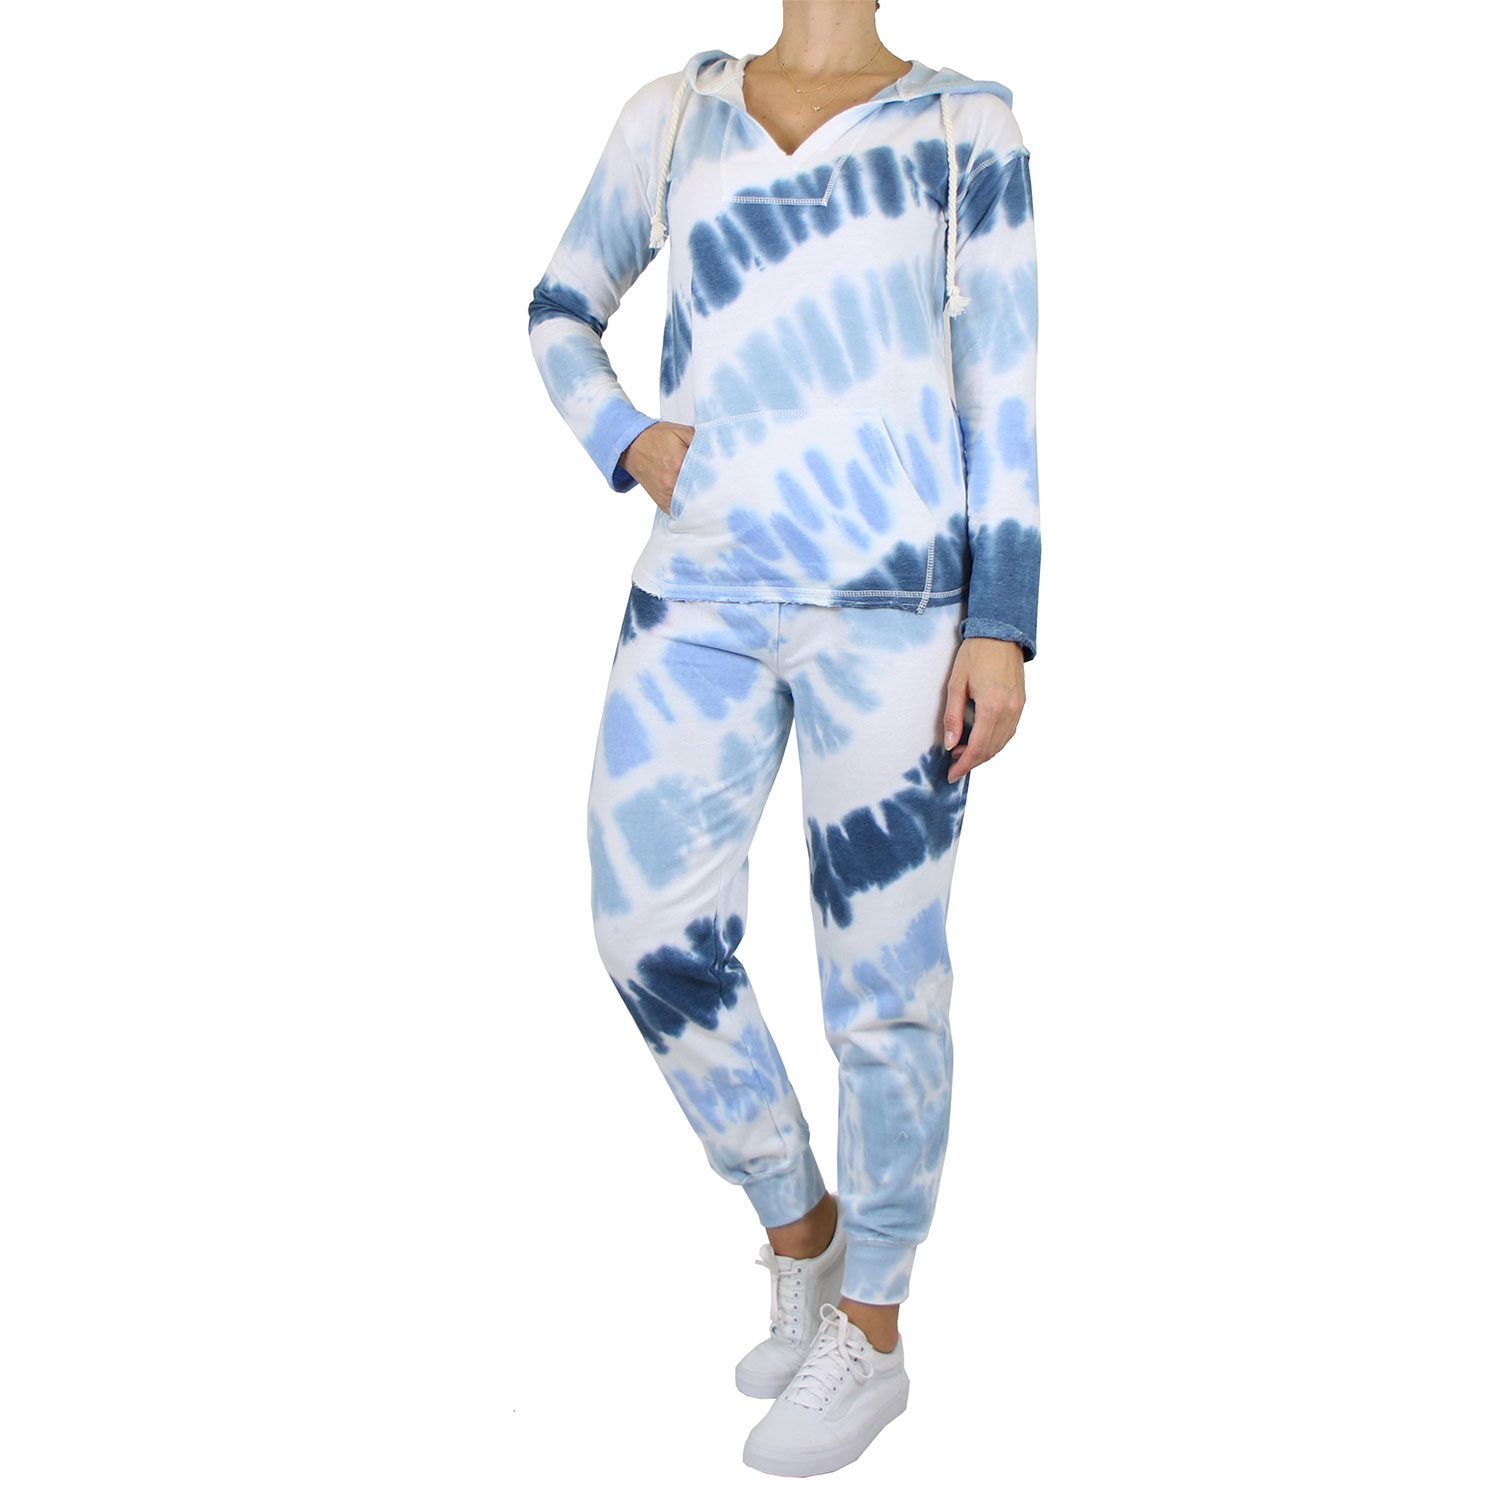 Women's Solid And Tie Dye Top & Bottom 2-Piece Jogger Sets